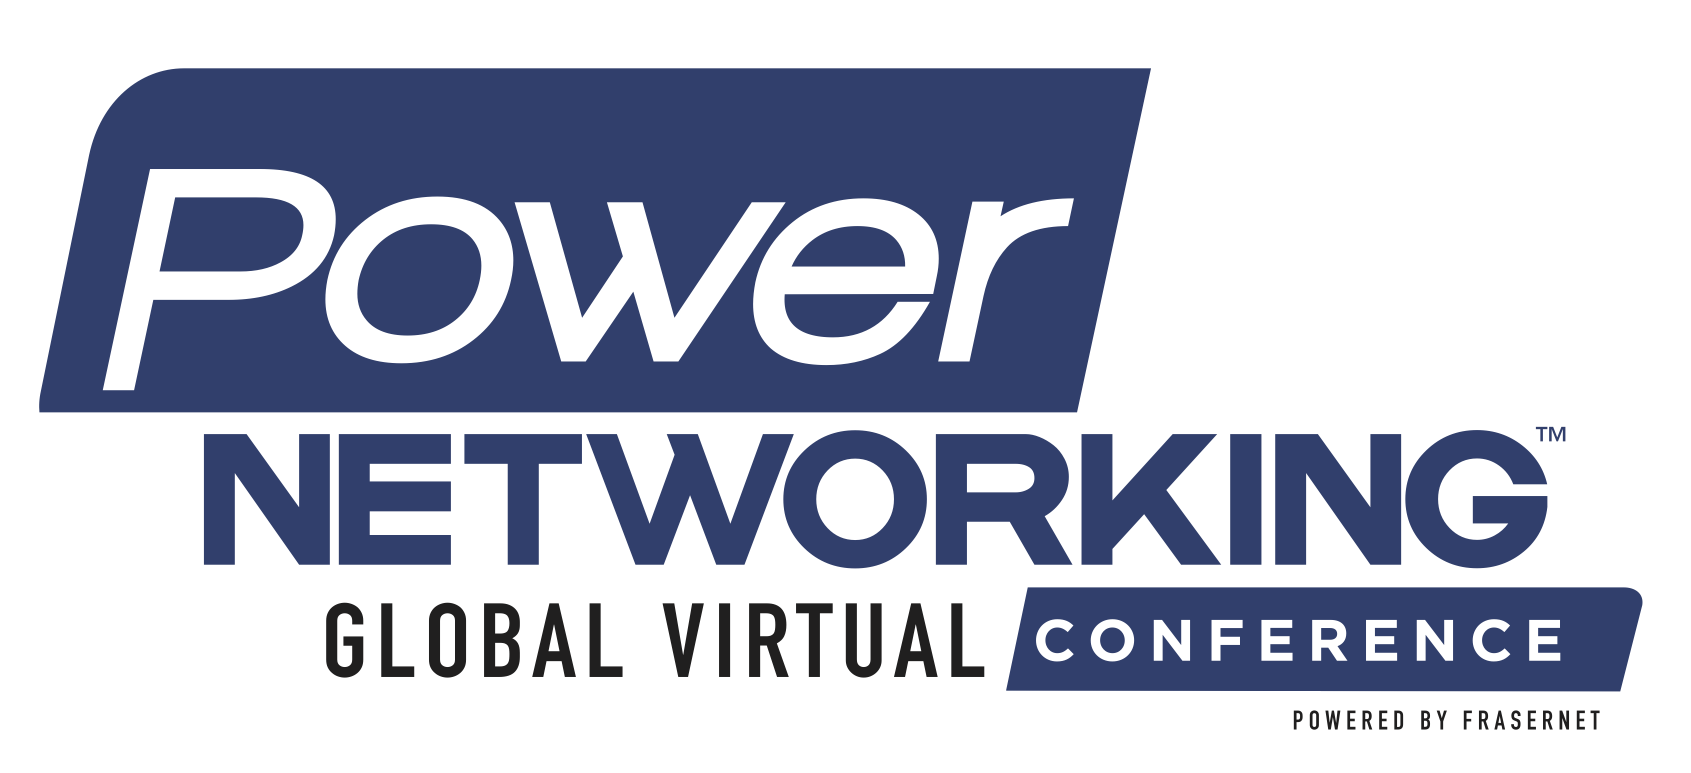 Power Networking Conference Logo